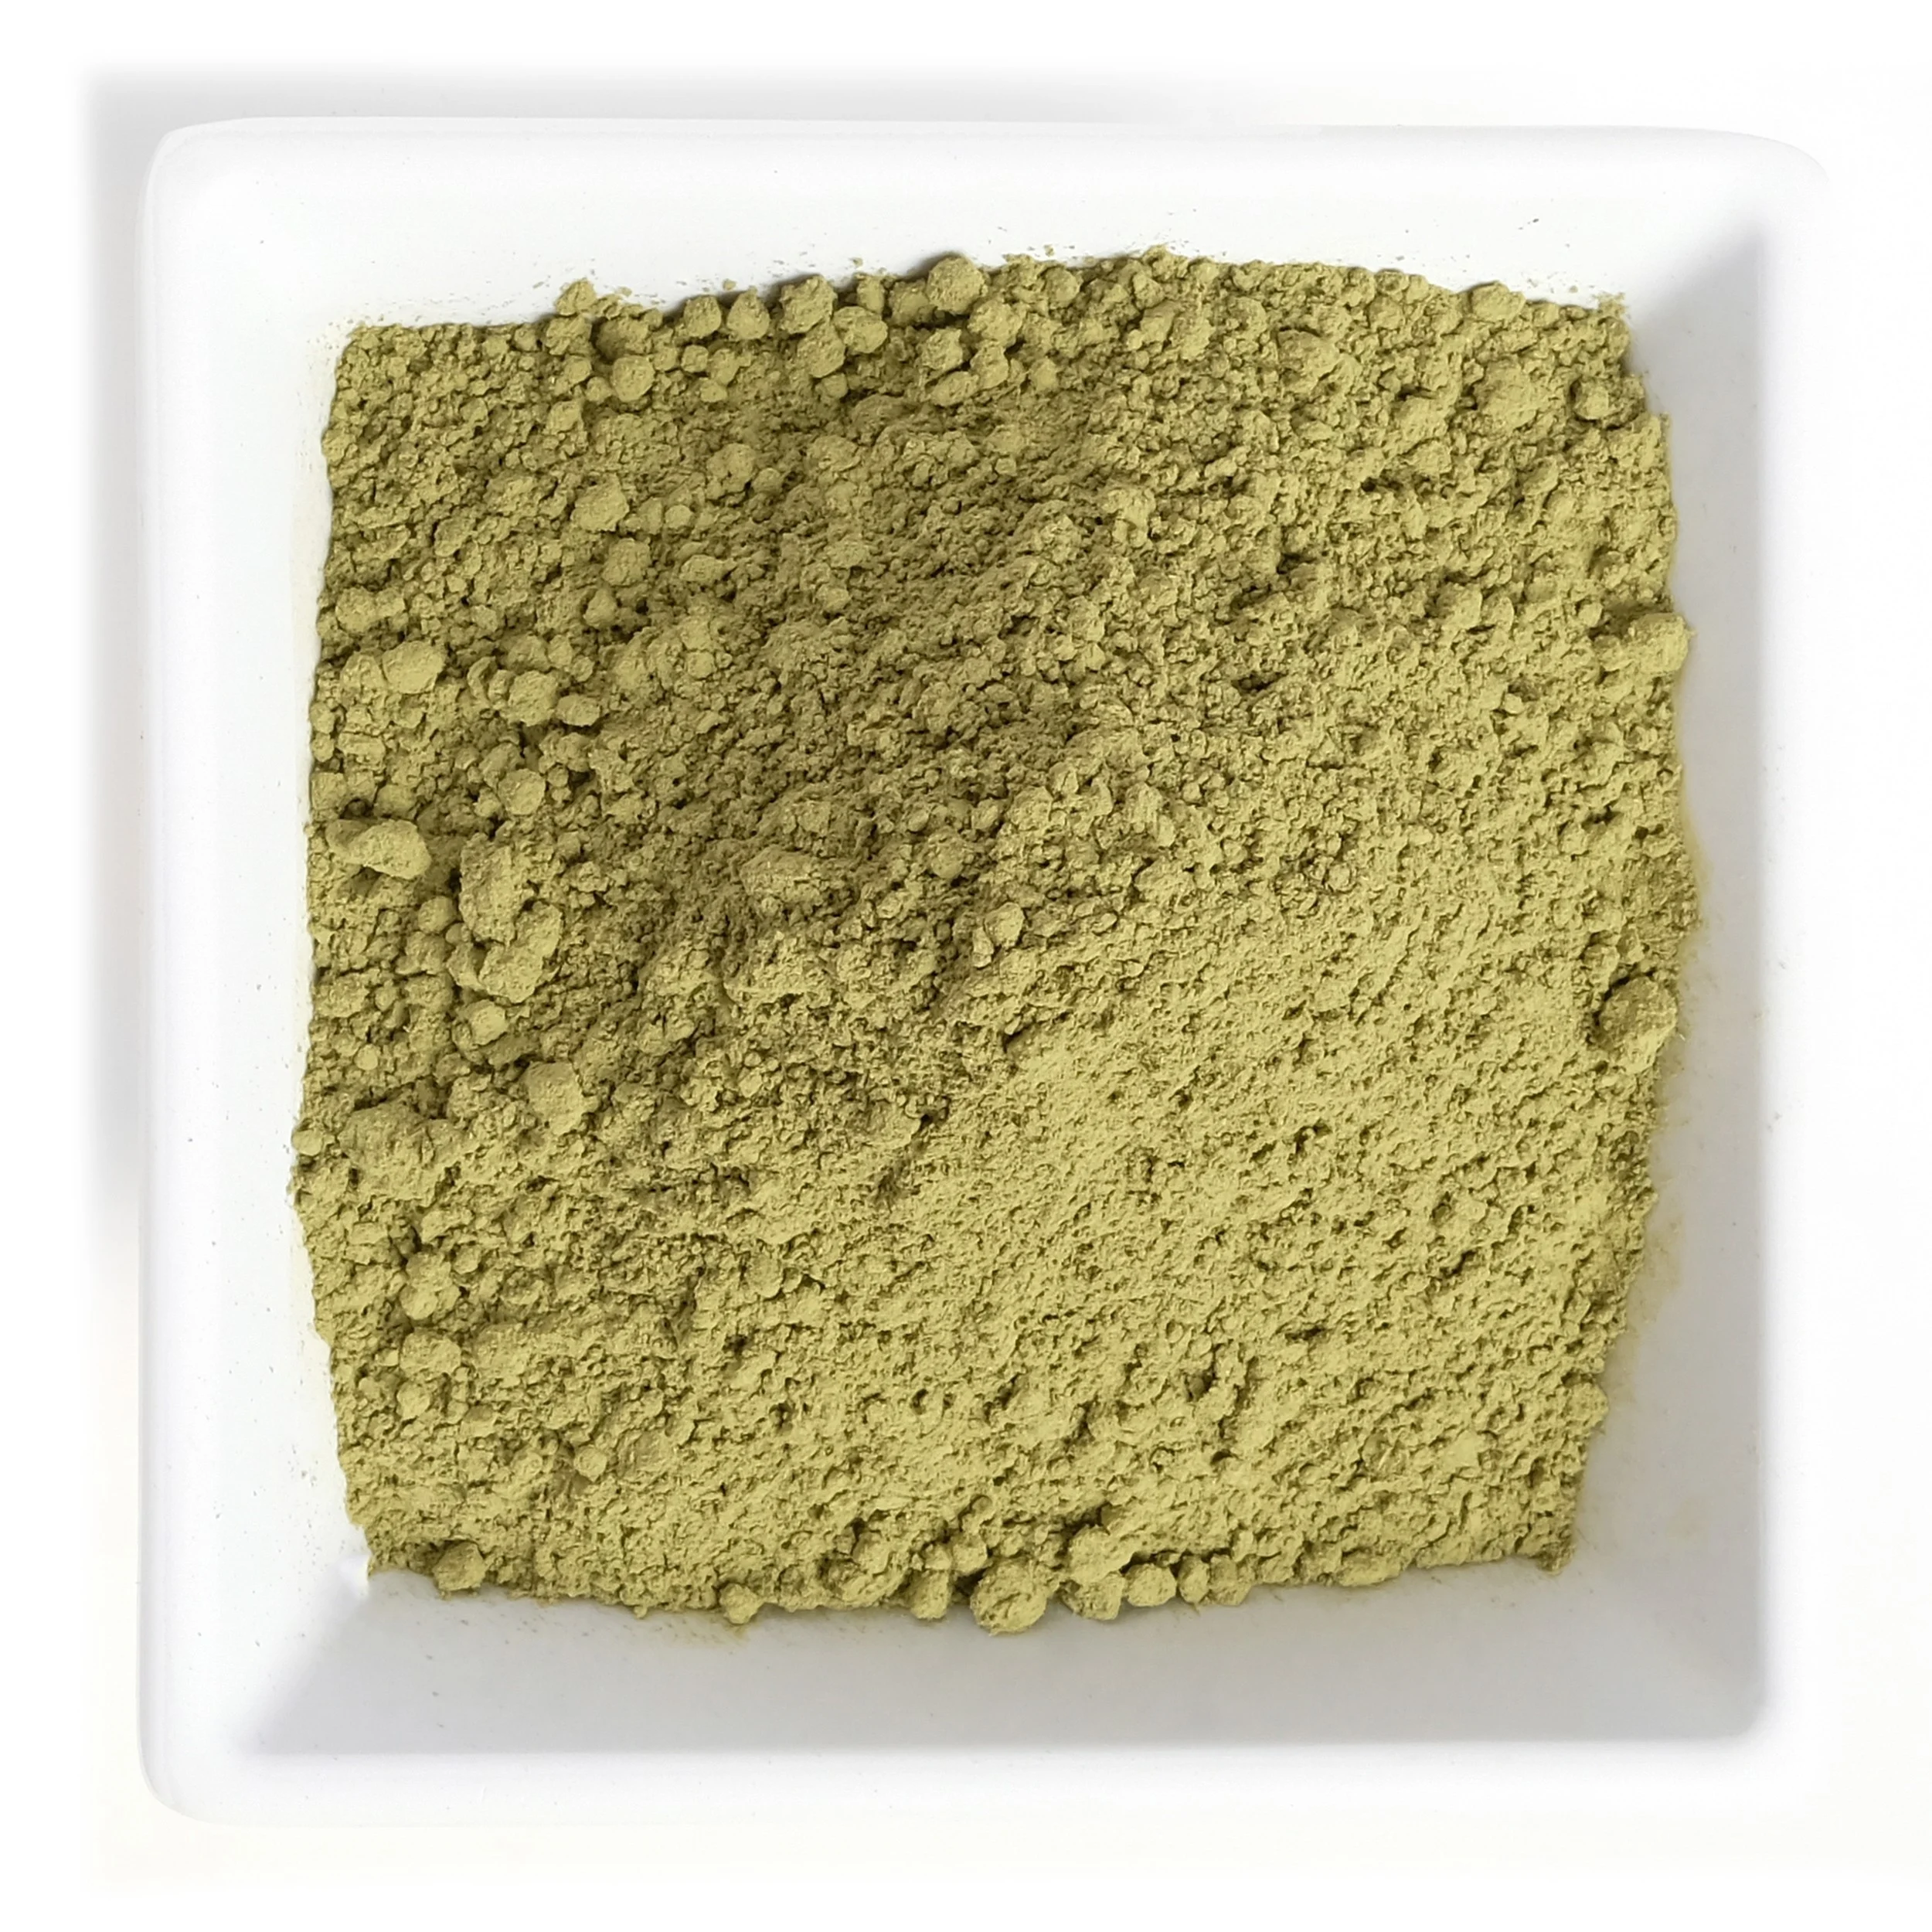 What are the benefits of taking kratom in pill form?